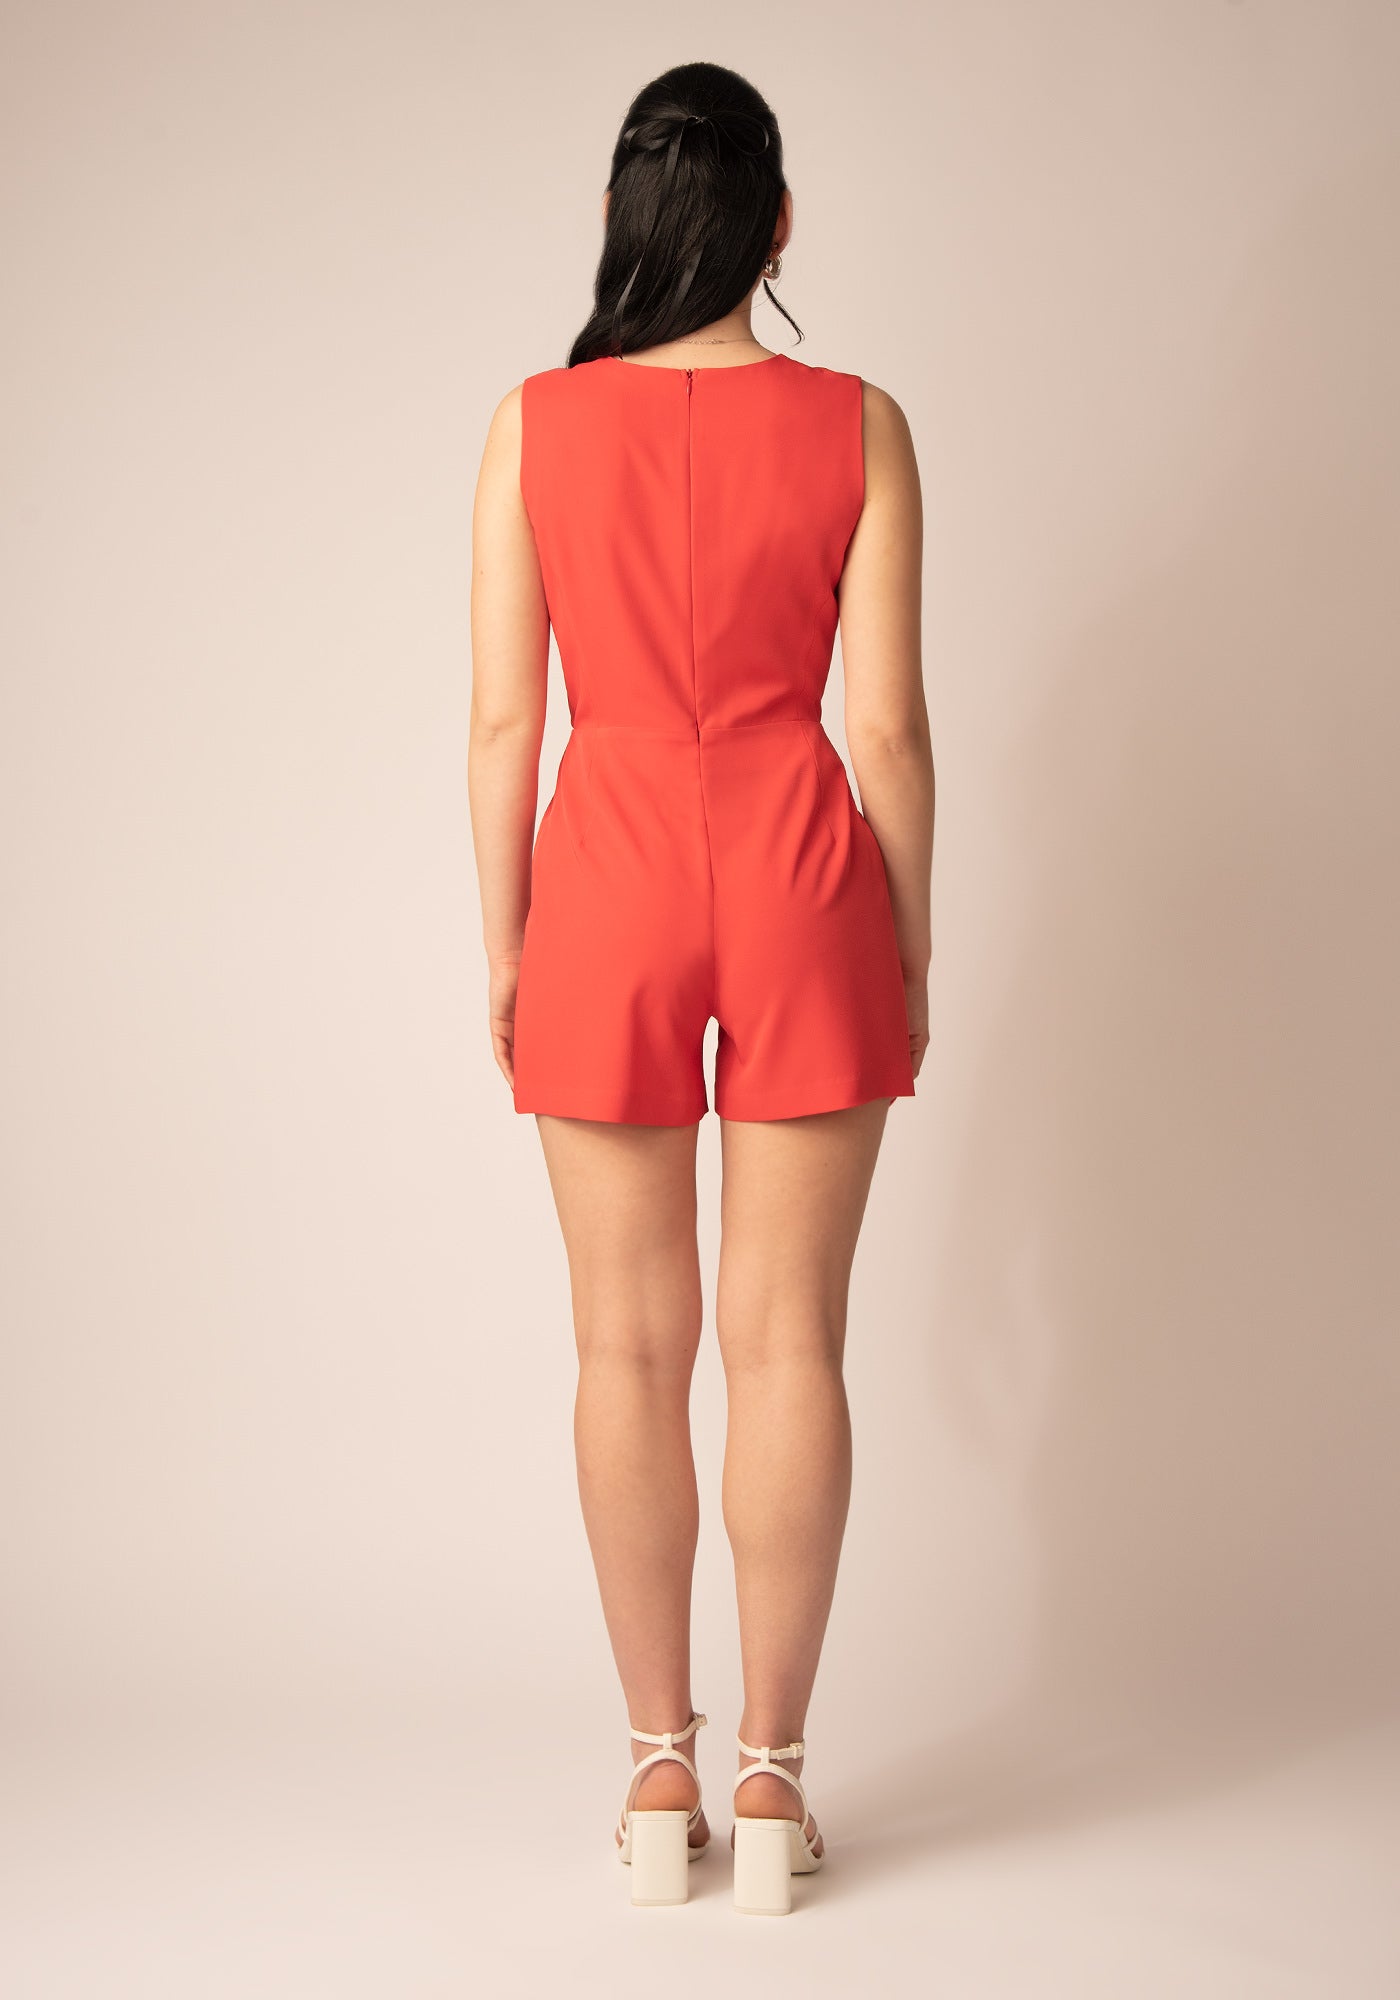 Cutout Playsuit in Coral